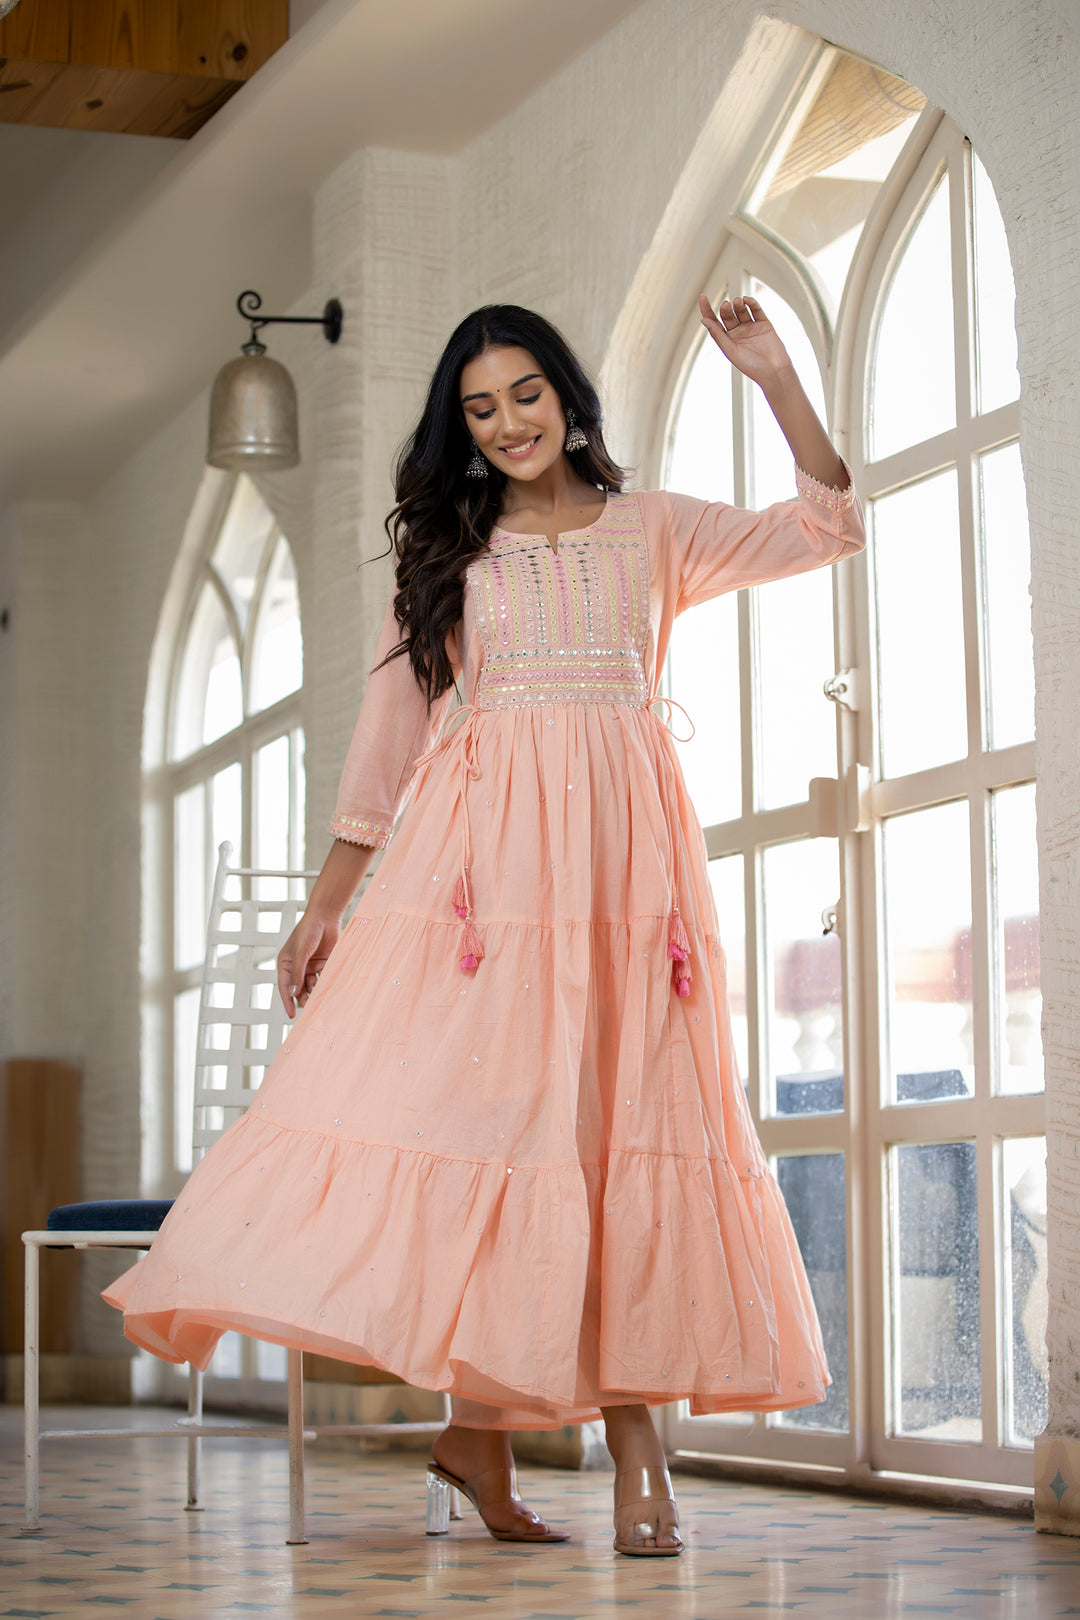 Buy Peach Ethnic Dress for ladies | Best Indian Traditional Dress for Women Online